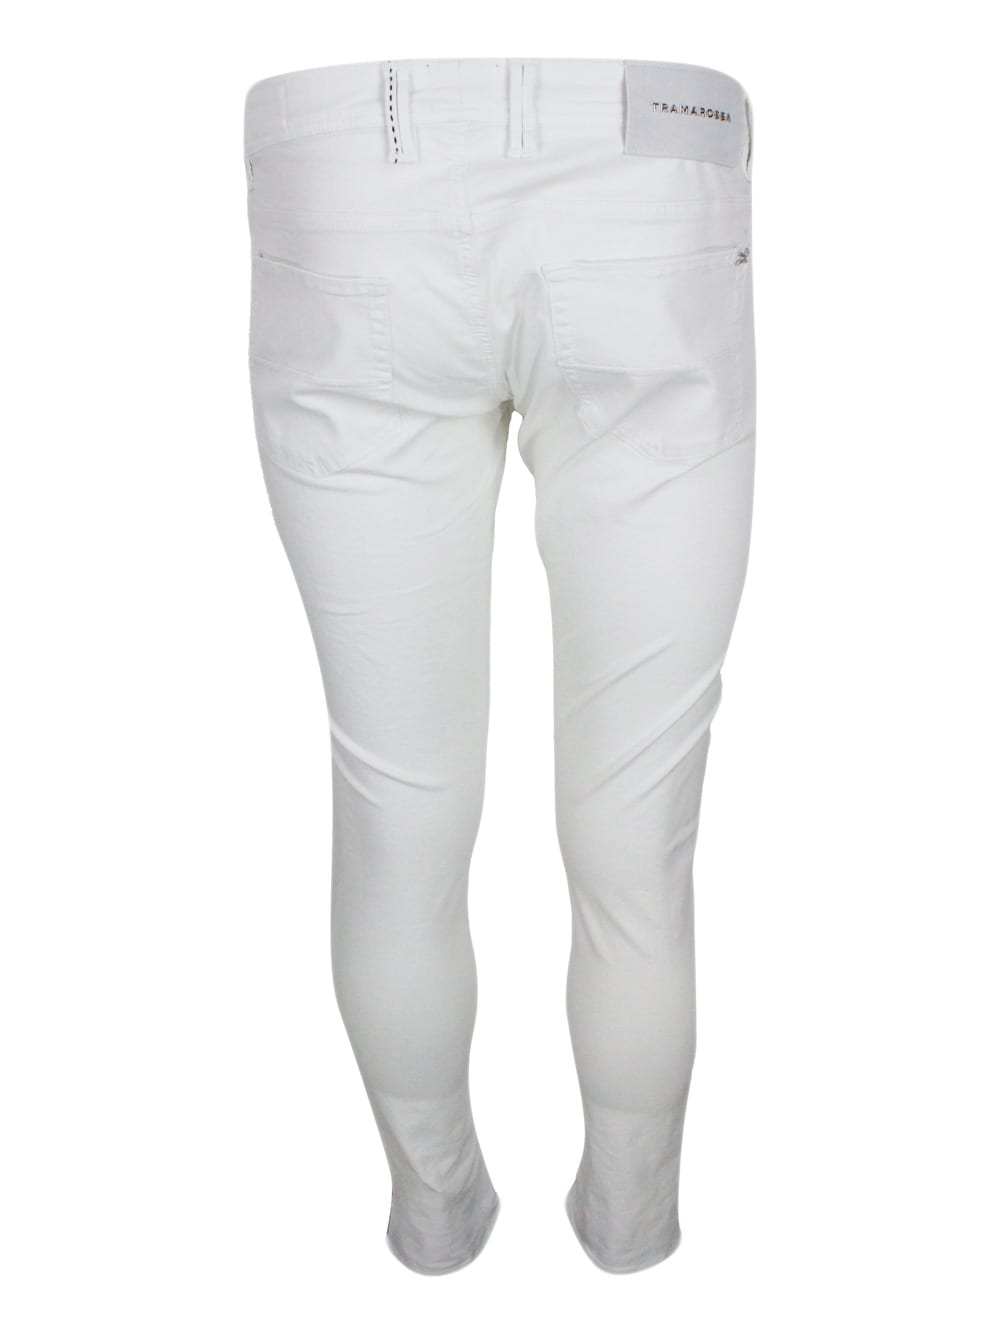 Shop Sartoria Tramarossa Leonardo Slim Zip Trousers In Soft Cotton With 5 Pockets With Tailored Stitching And Suede Tab. Zip  In White